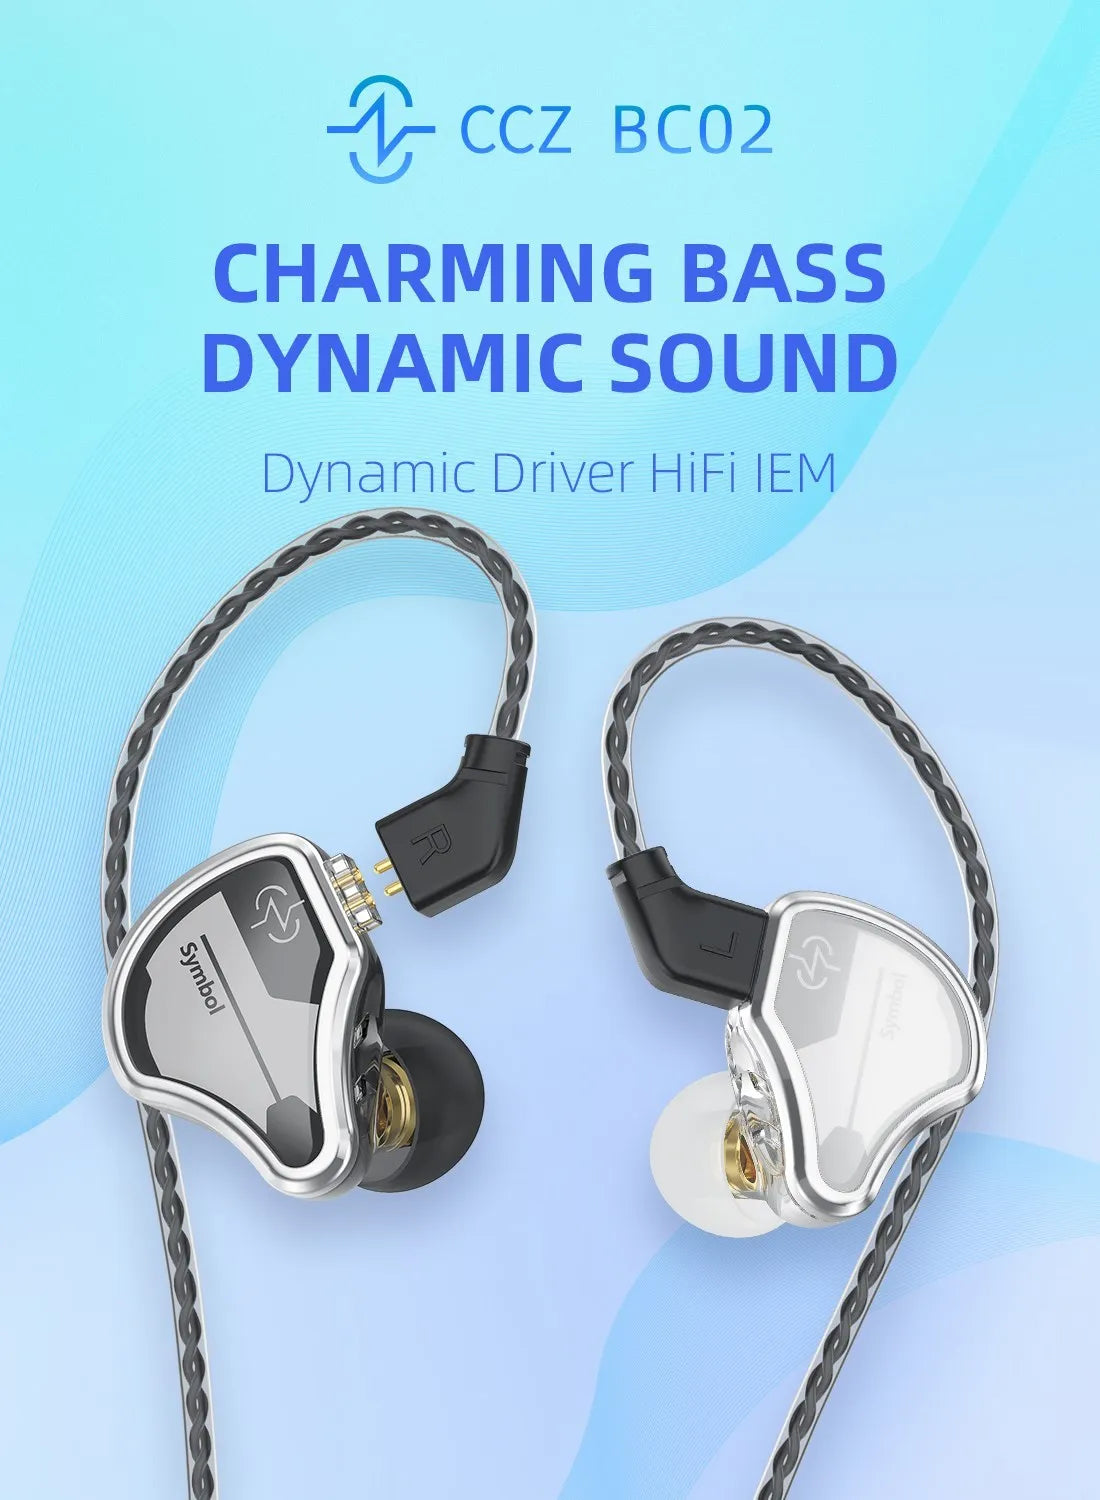 CCZ BC02 High Fidelity Sound Quality Earphones Wired Dynamic Driver In Ear Monitor Noise Cancelling Earbuds Headphone Headset kz - The HiFi Cat